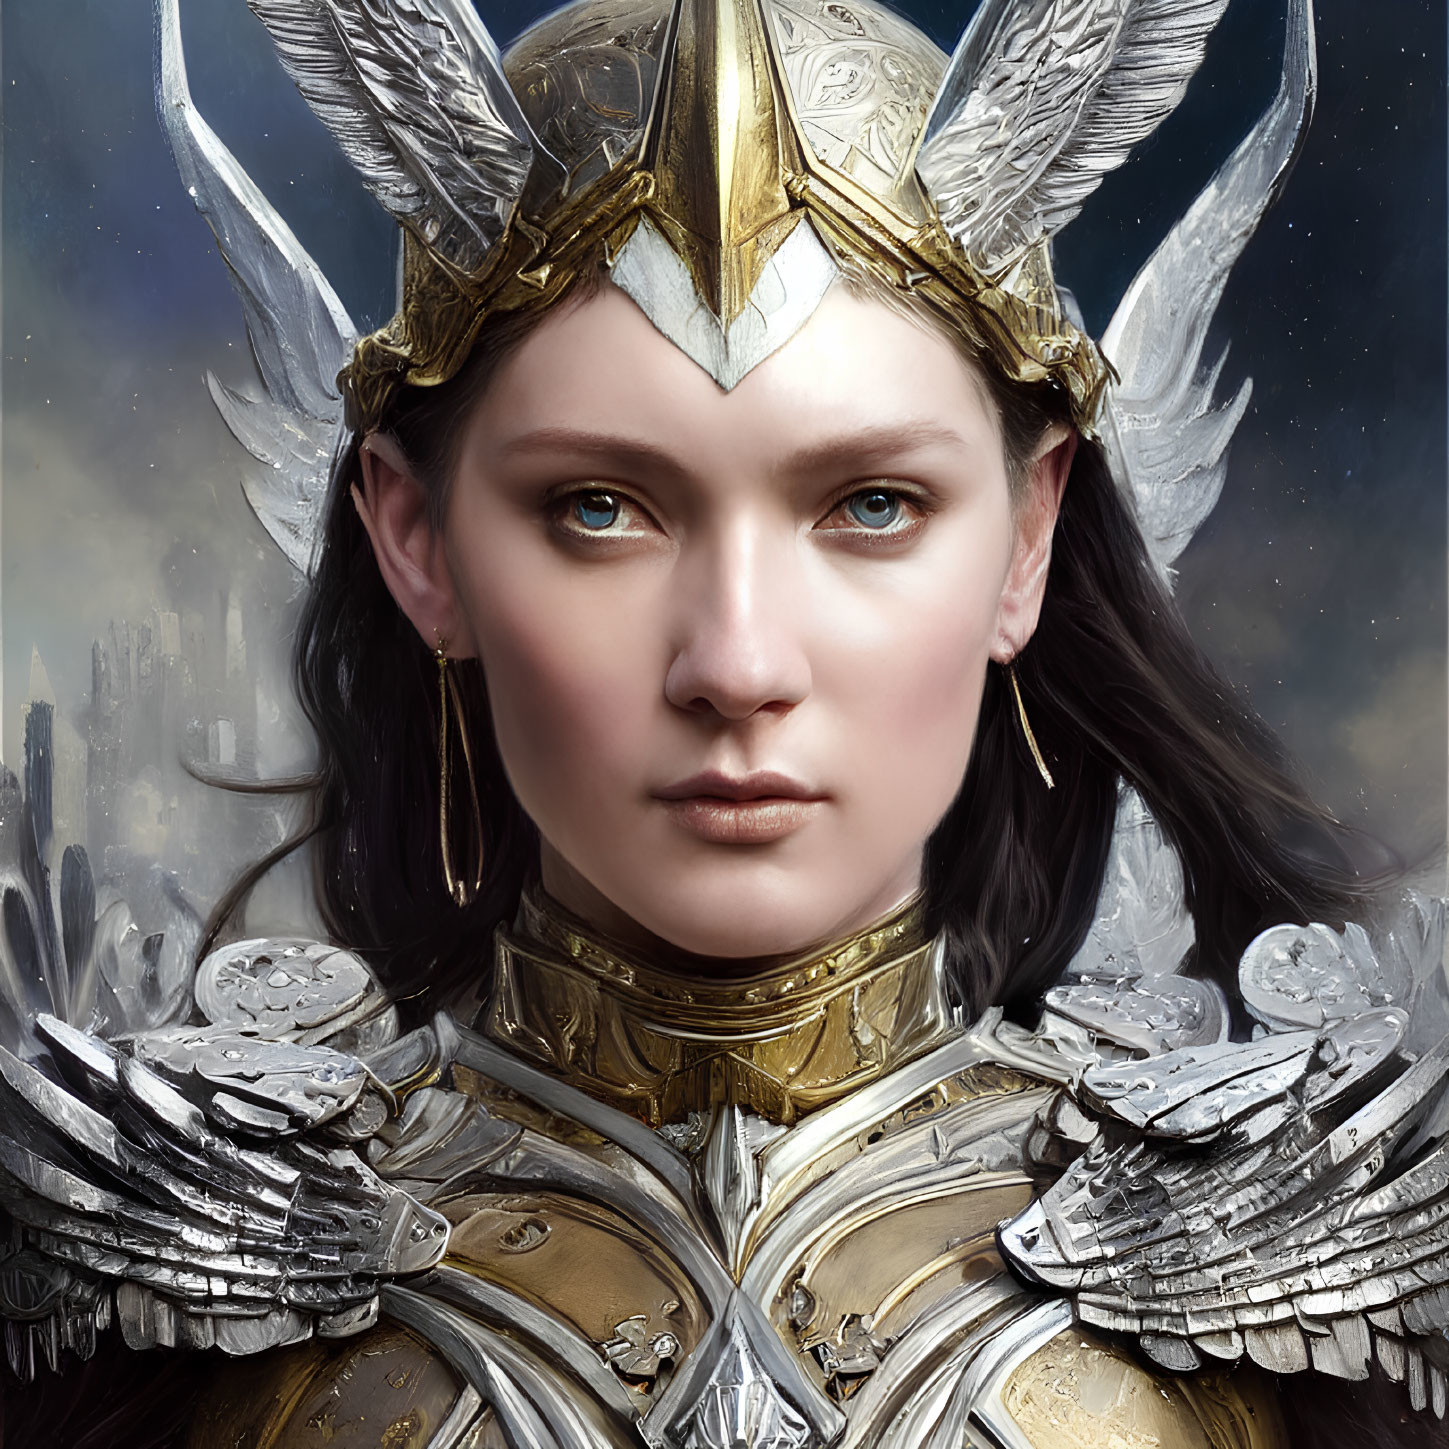 Woman in golden armor with winged helmet against cloudy sky and spires